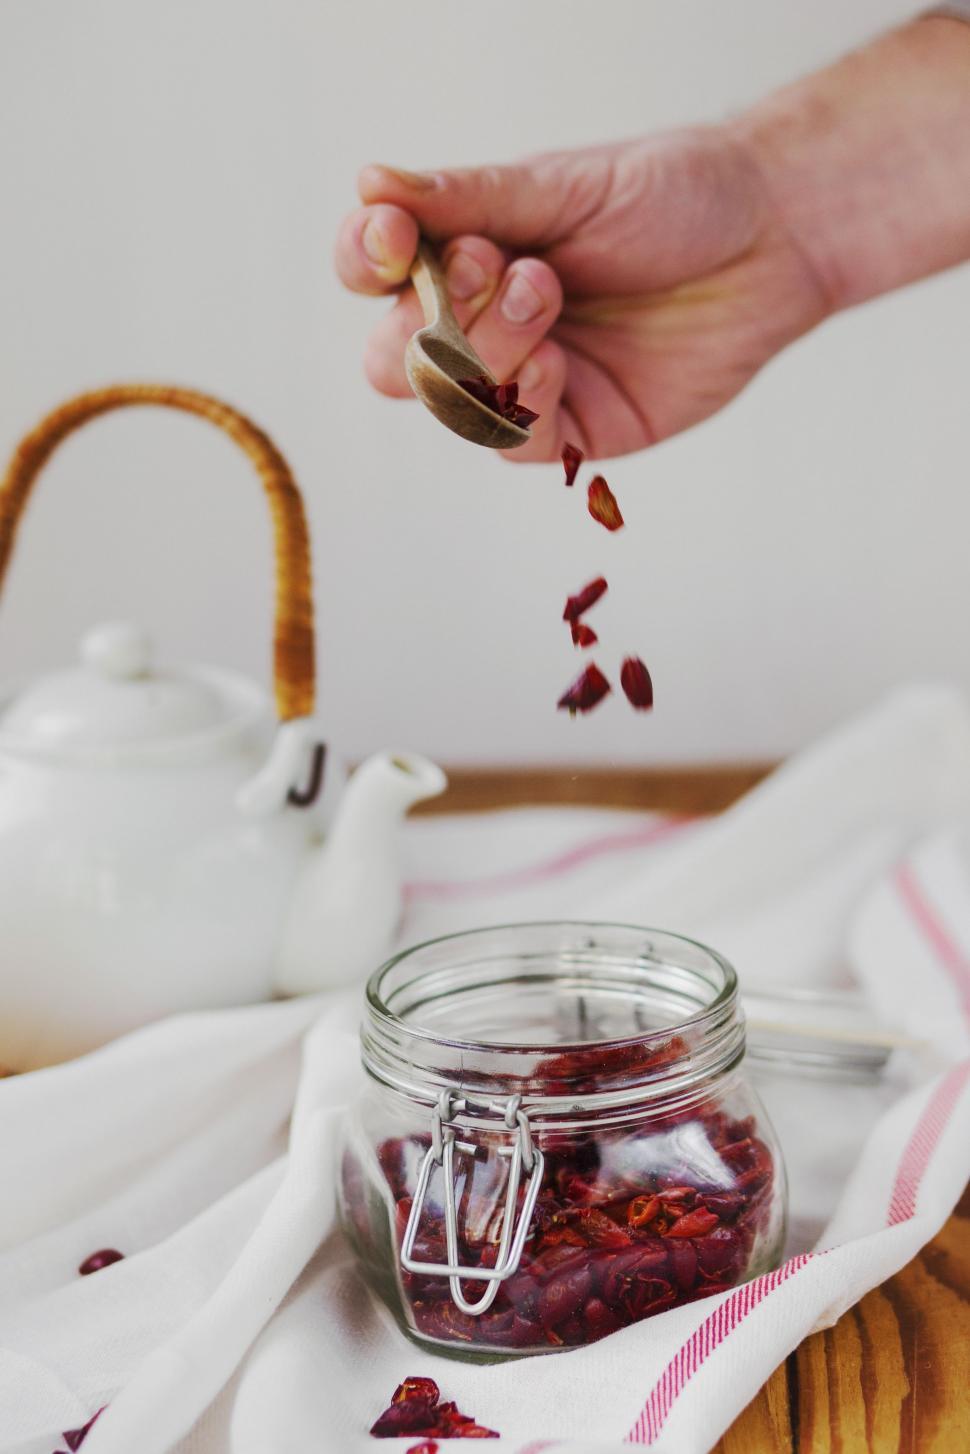 Free Image of Person Pouring Tea Into Glass Jar 